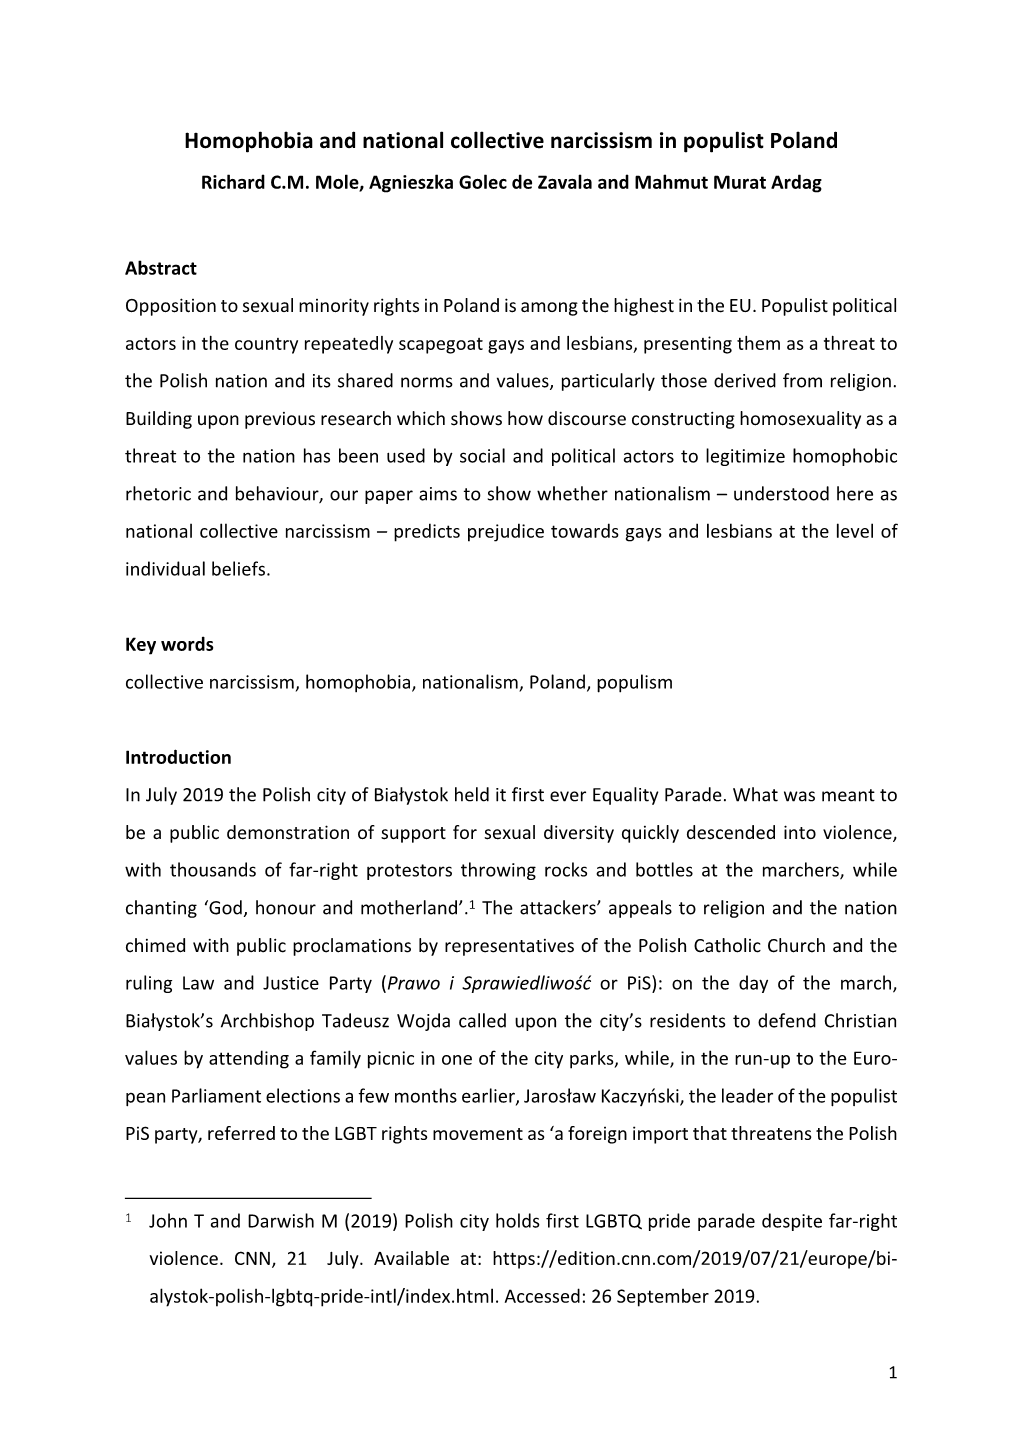 Homophobia and National Collective Narcissism in Populist Poland Richard C.M